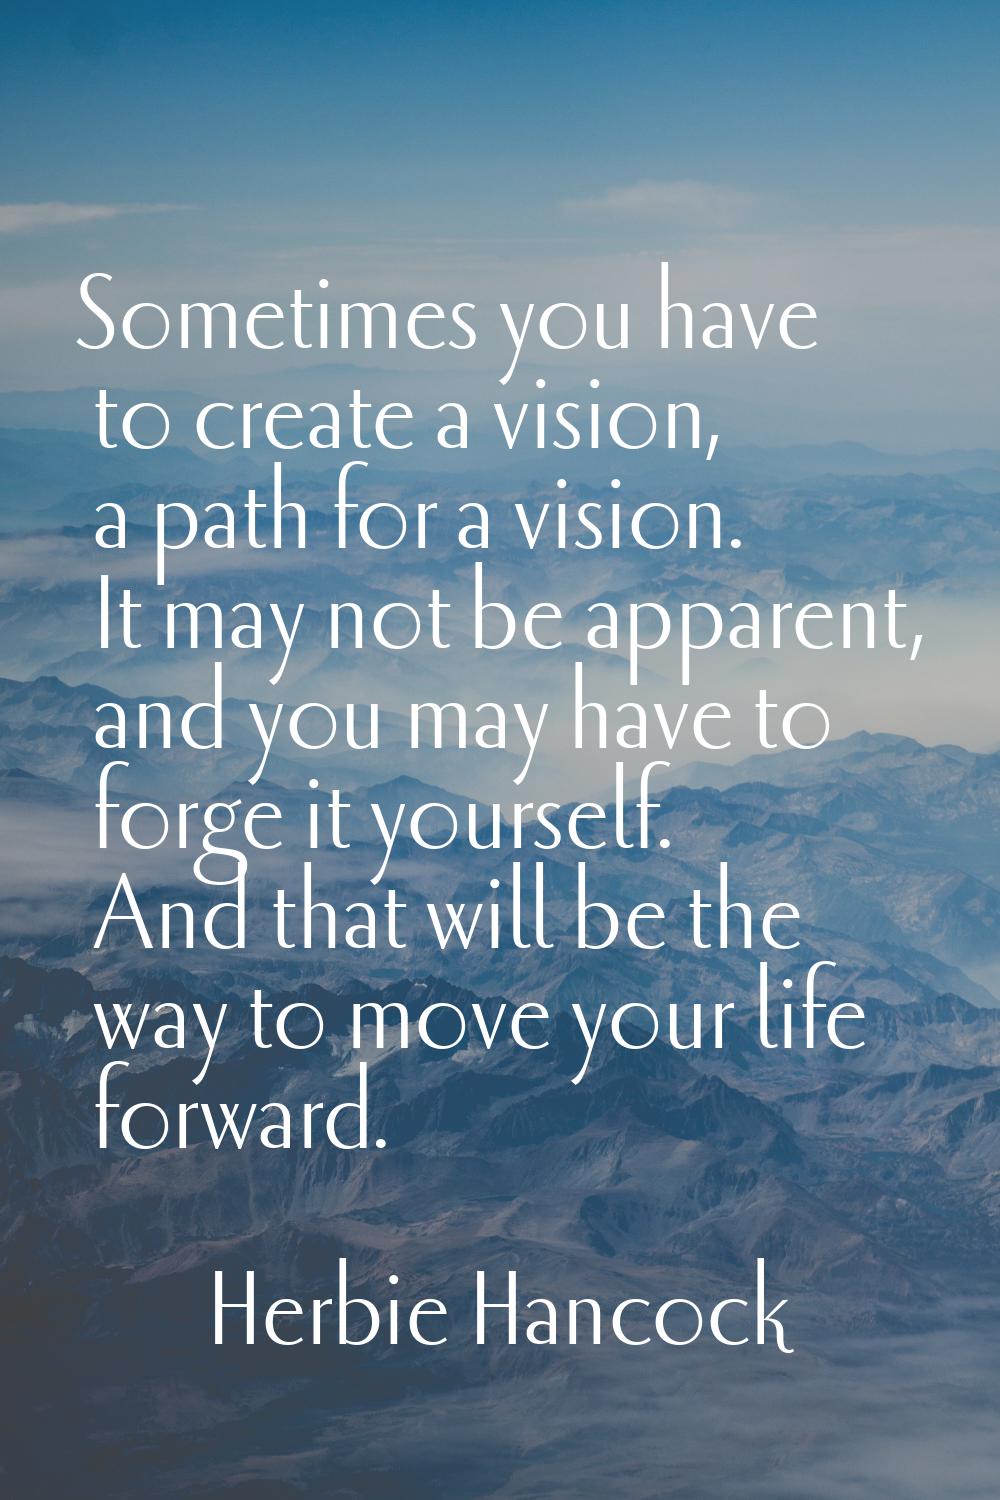 Sometimes you have to create a vision, a path for a vision. It may not be apparent, and you may hav